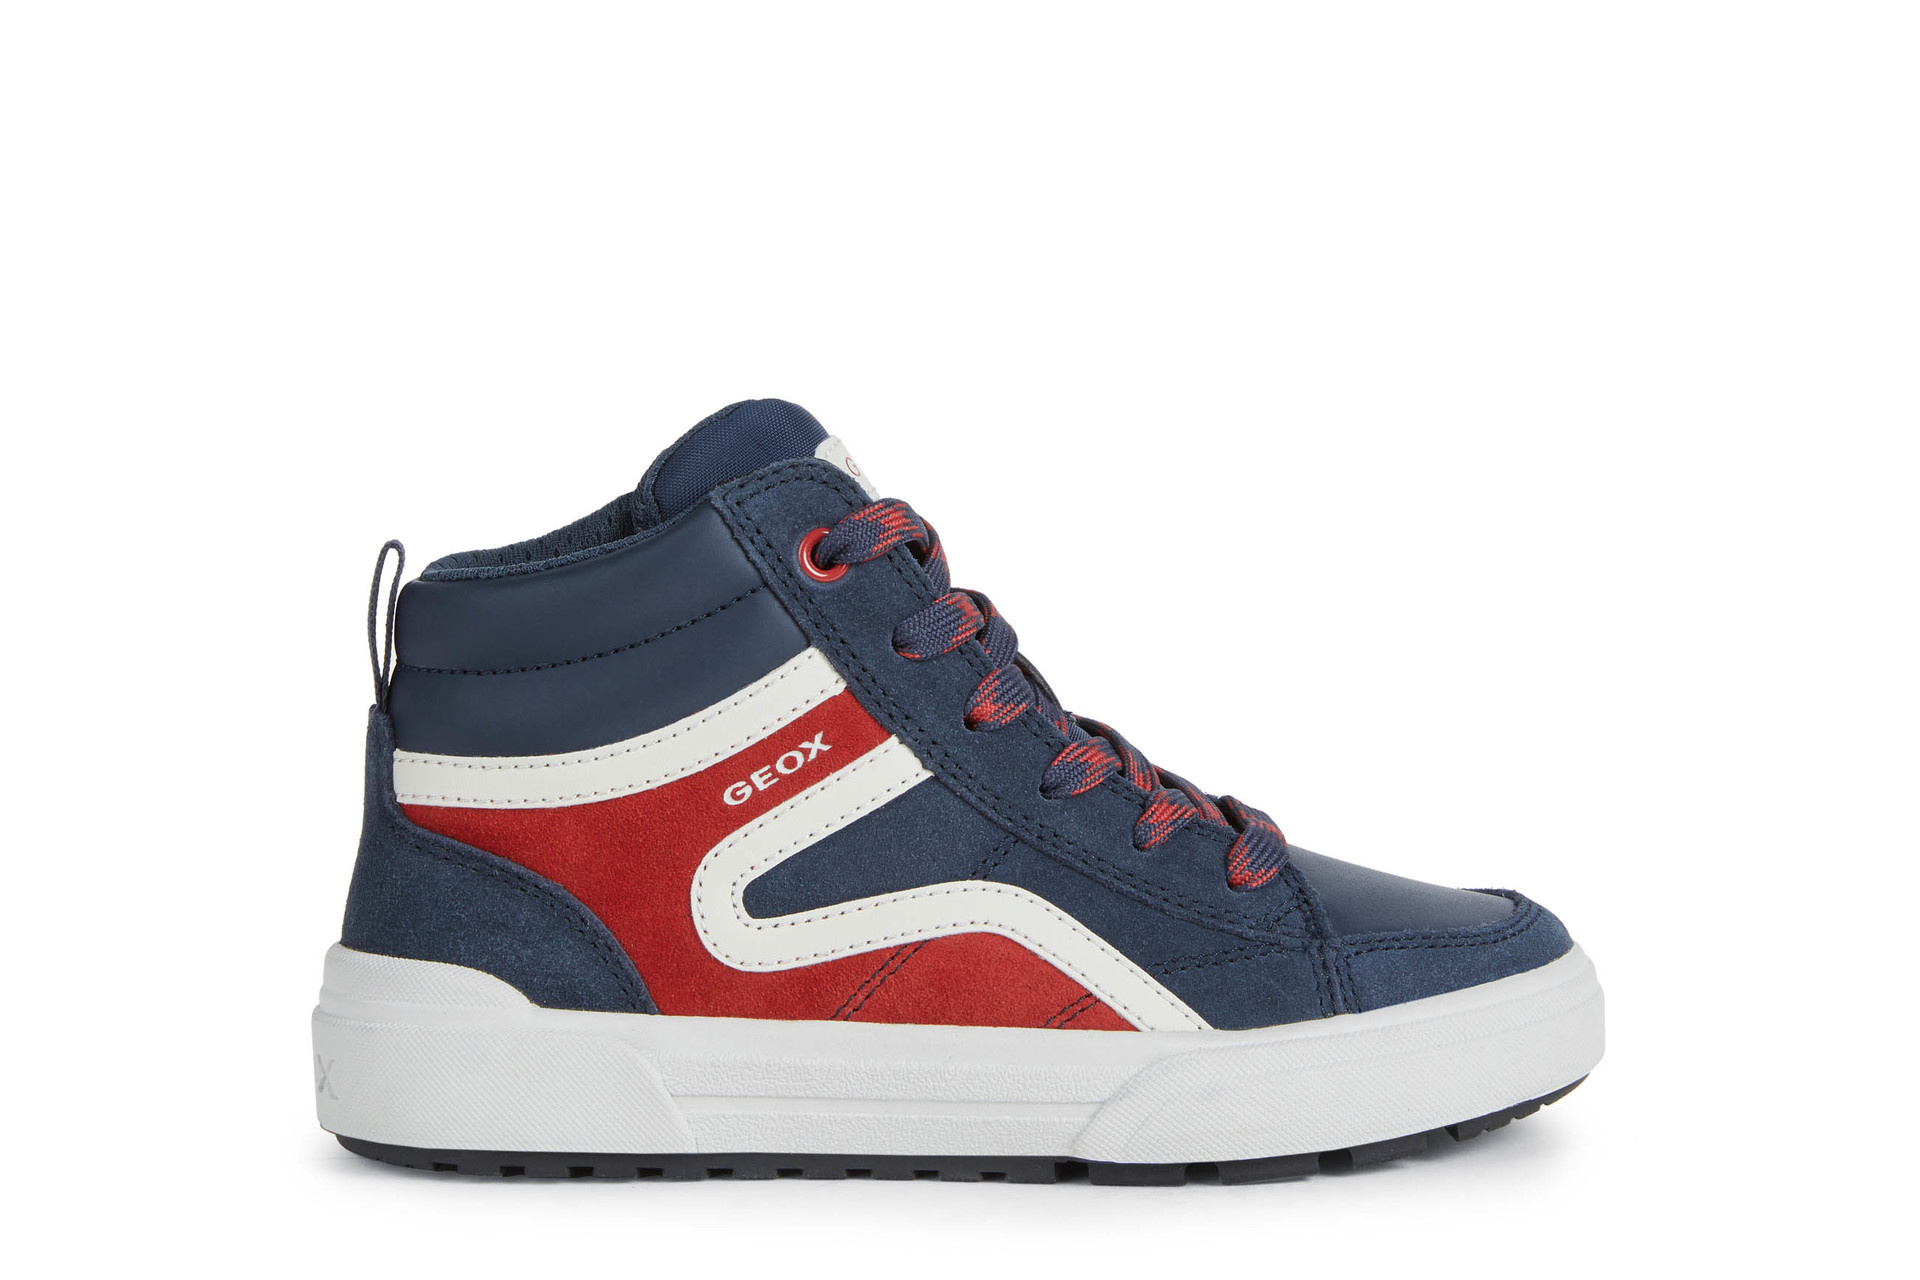 Geox Weemble Navy/Red